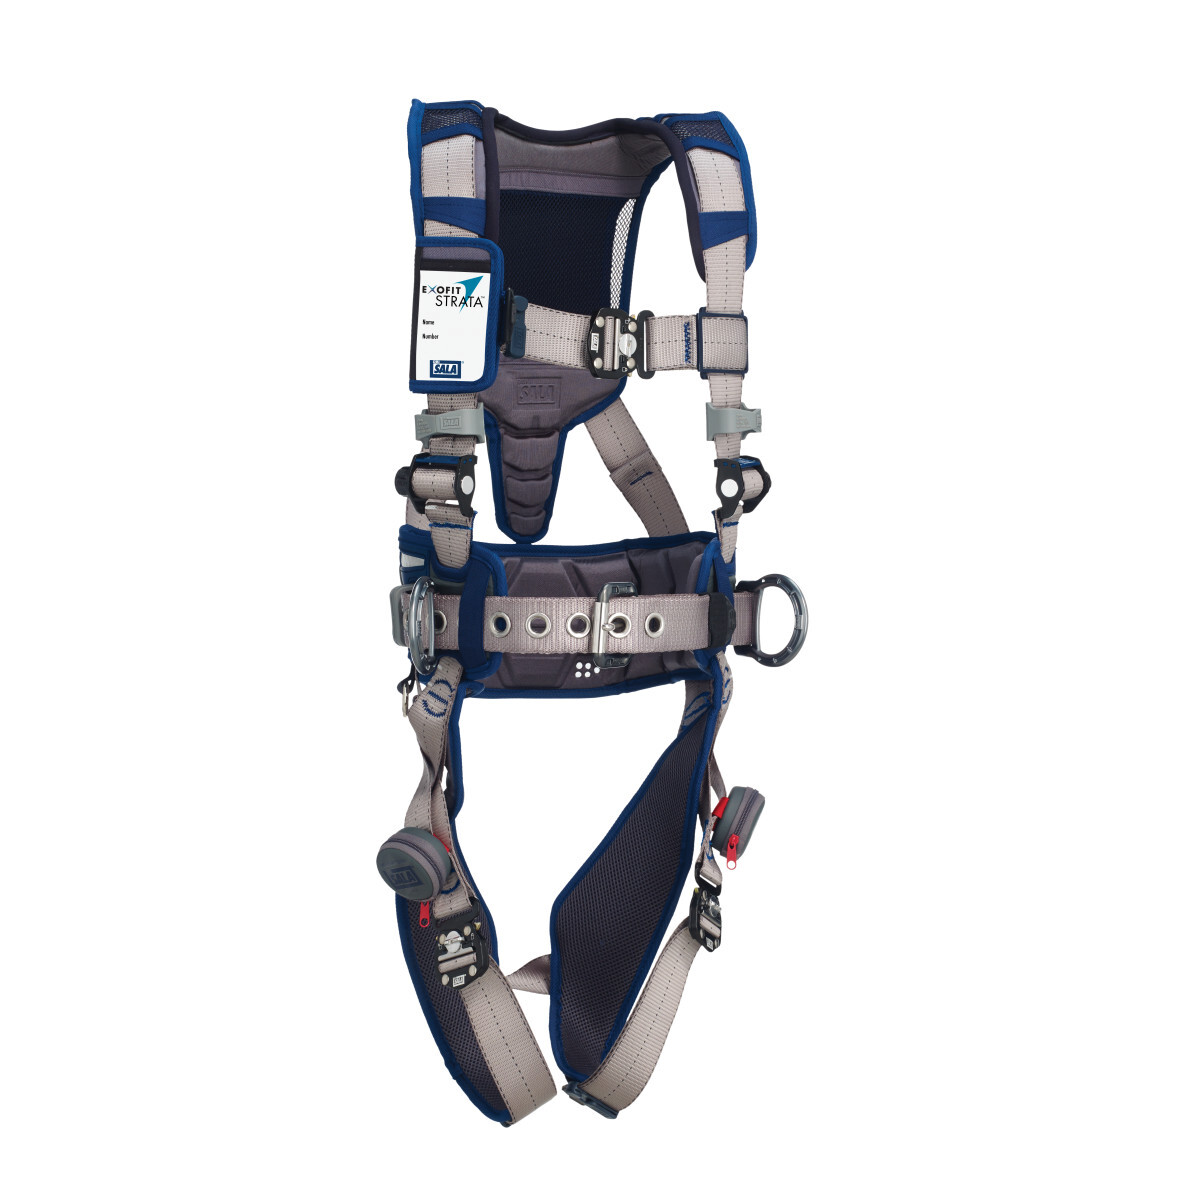 3M™ DBI-SALA® X-Large ExoFit STRATA™ Construction Style Harness With Aluminum Back And Side D-rings, Duo-Lok™ Quik Connect Buckl